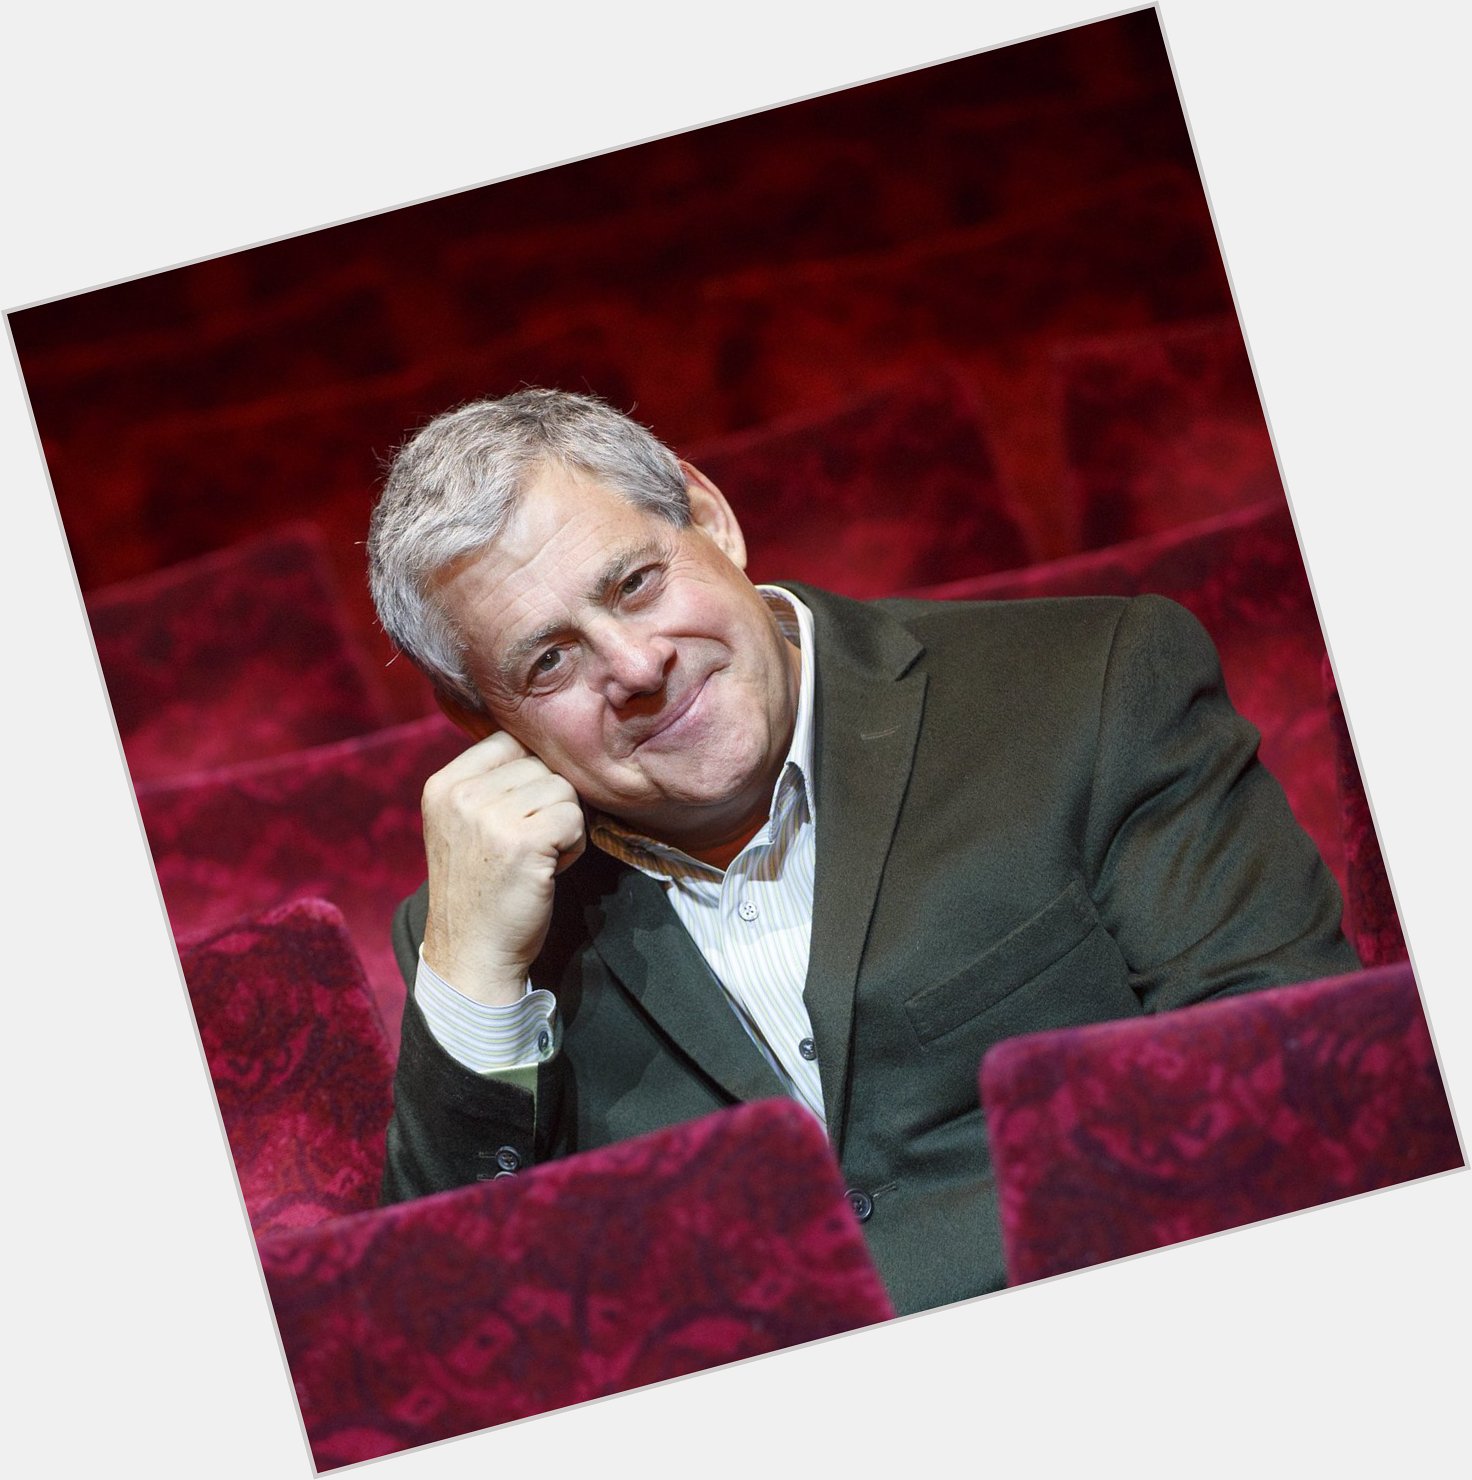 We wish the one and only Sir Cameron Mackintosh a very Happy Birthday! 